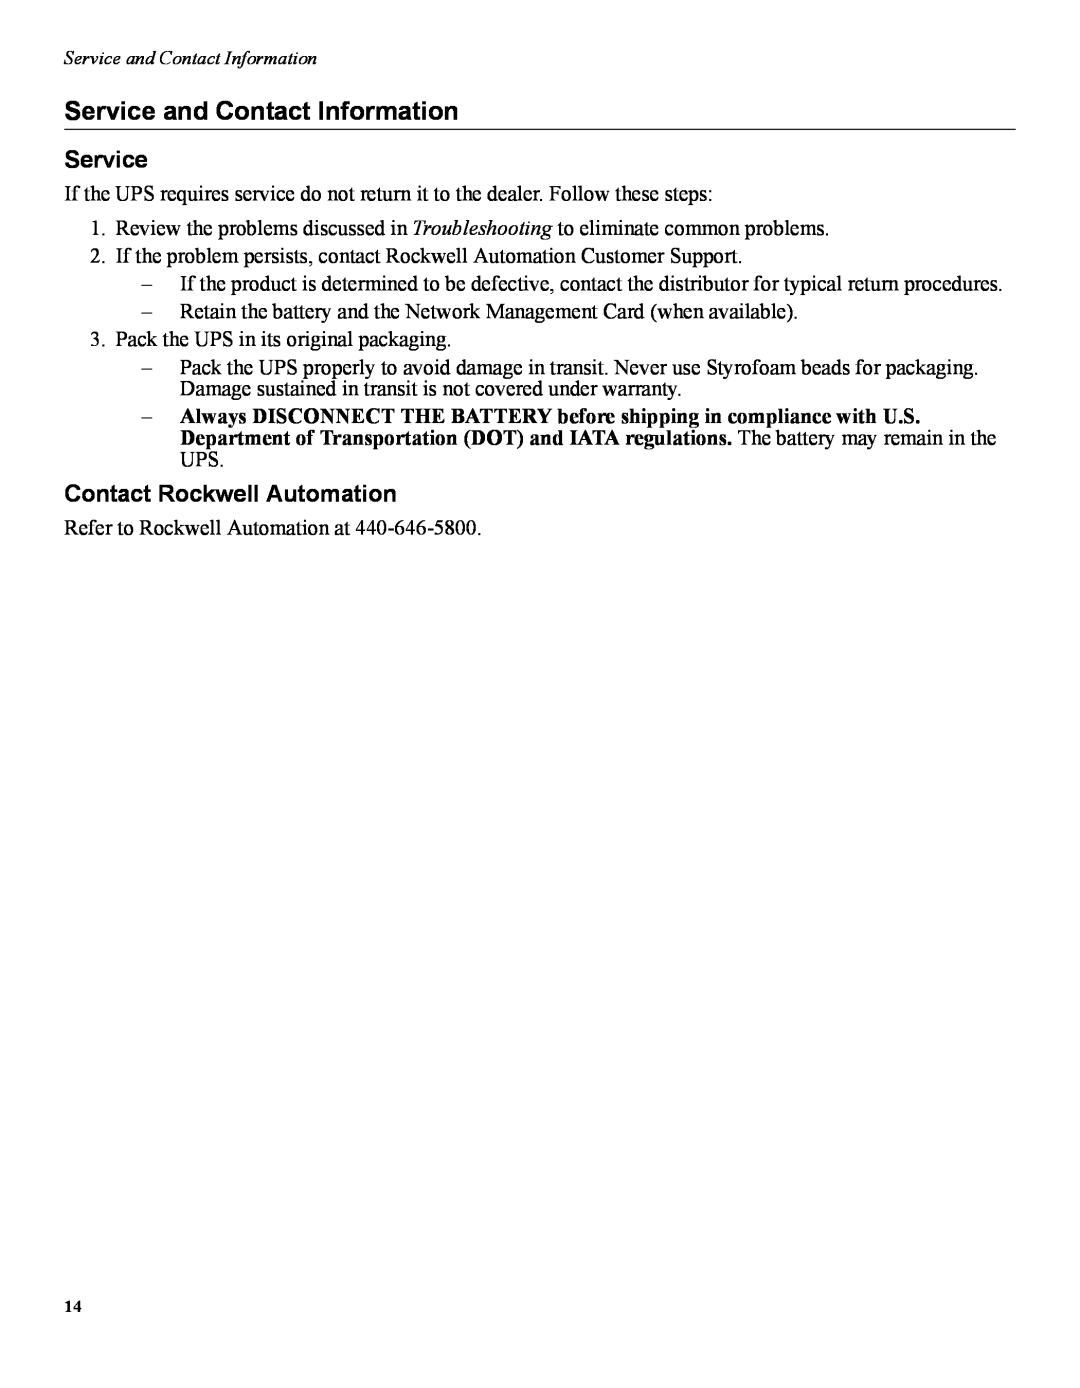 American Power Conversion 1609 user manual Service and Contact Information, Contact Rockwell Automation 